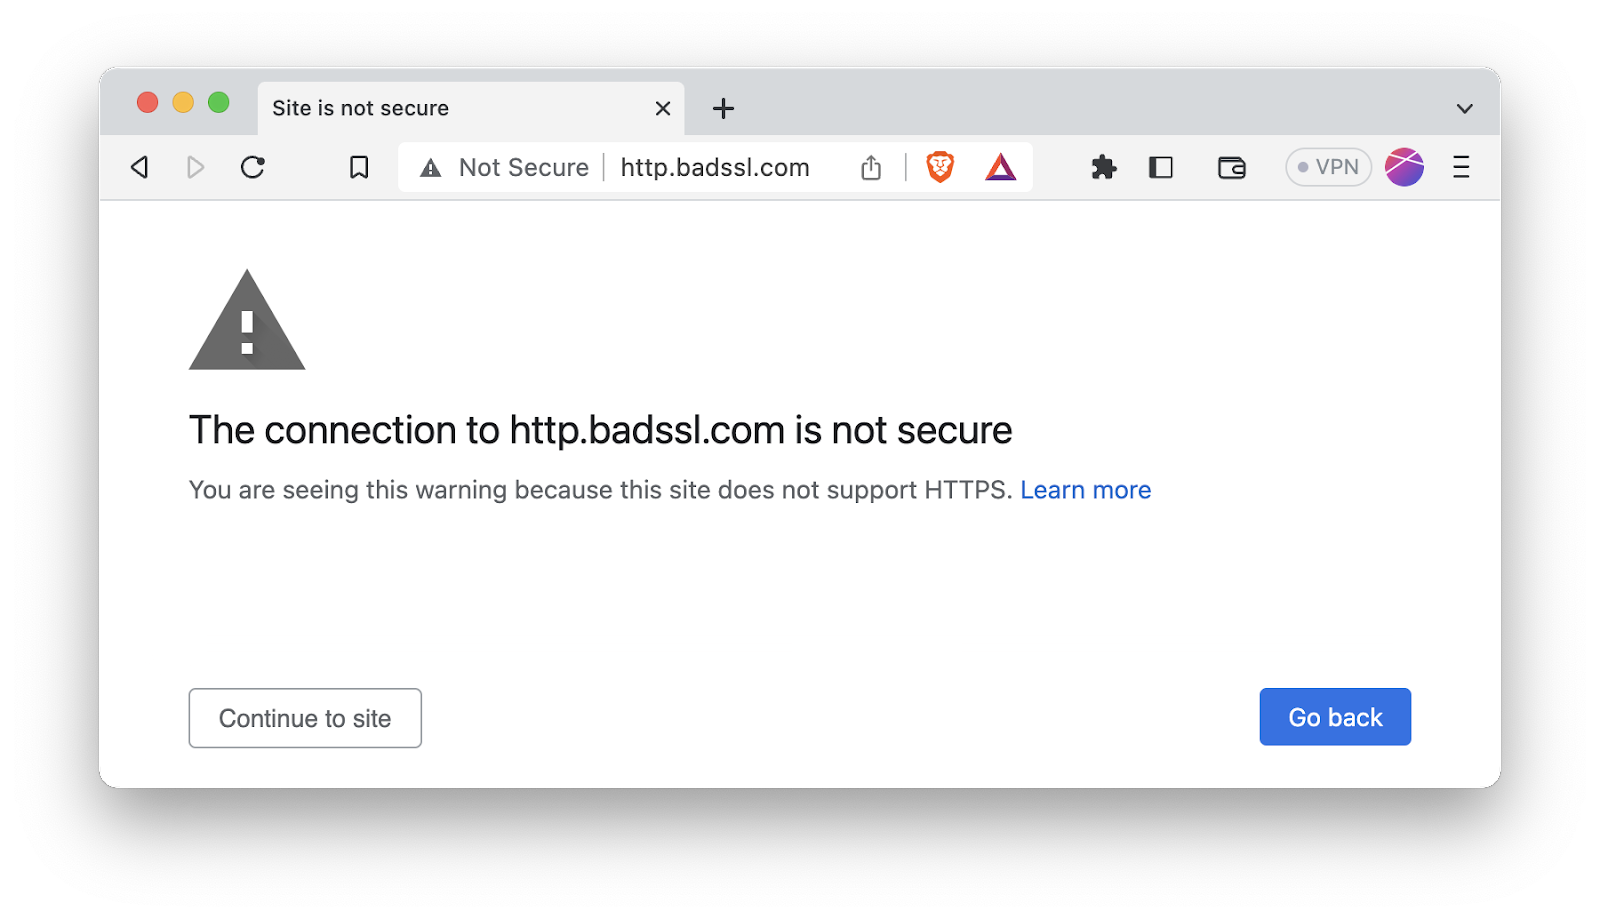 Site_is_not_secure.png